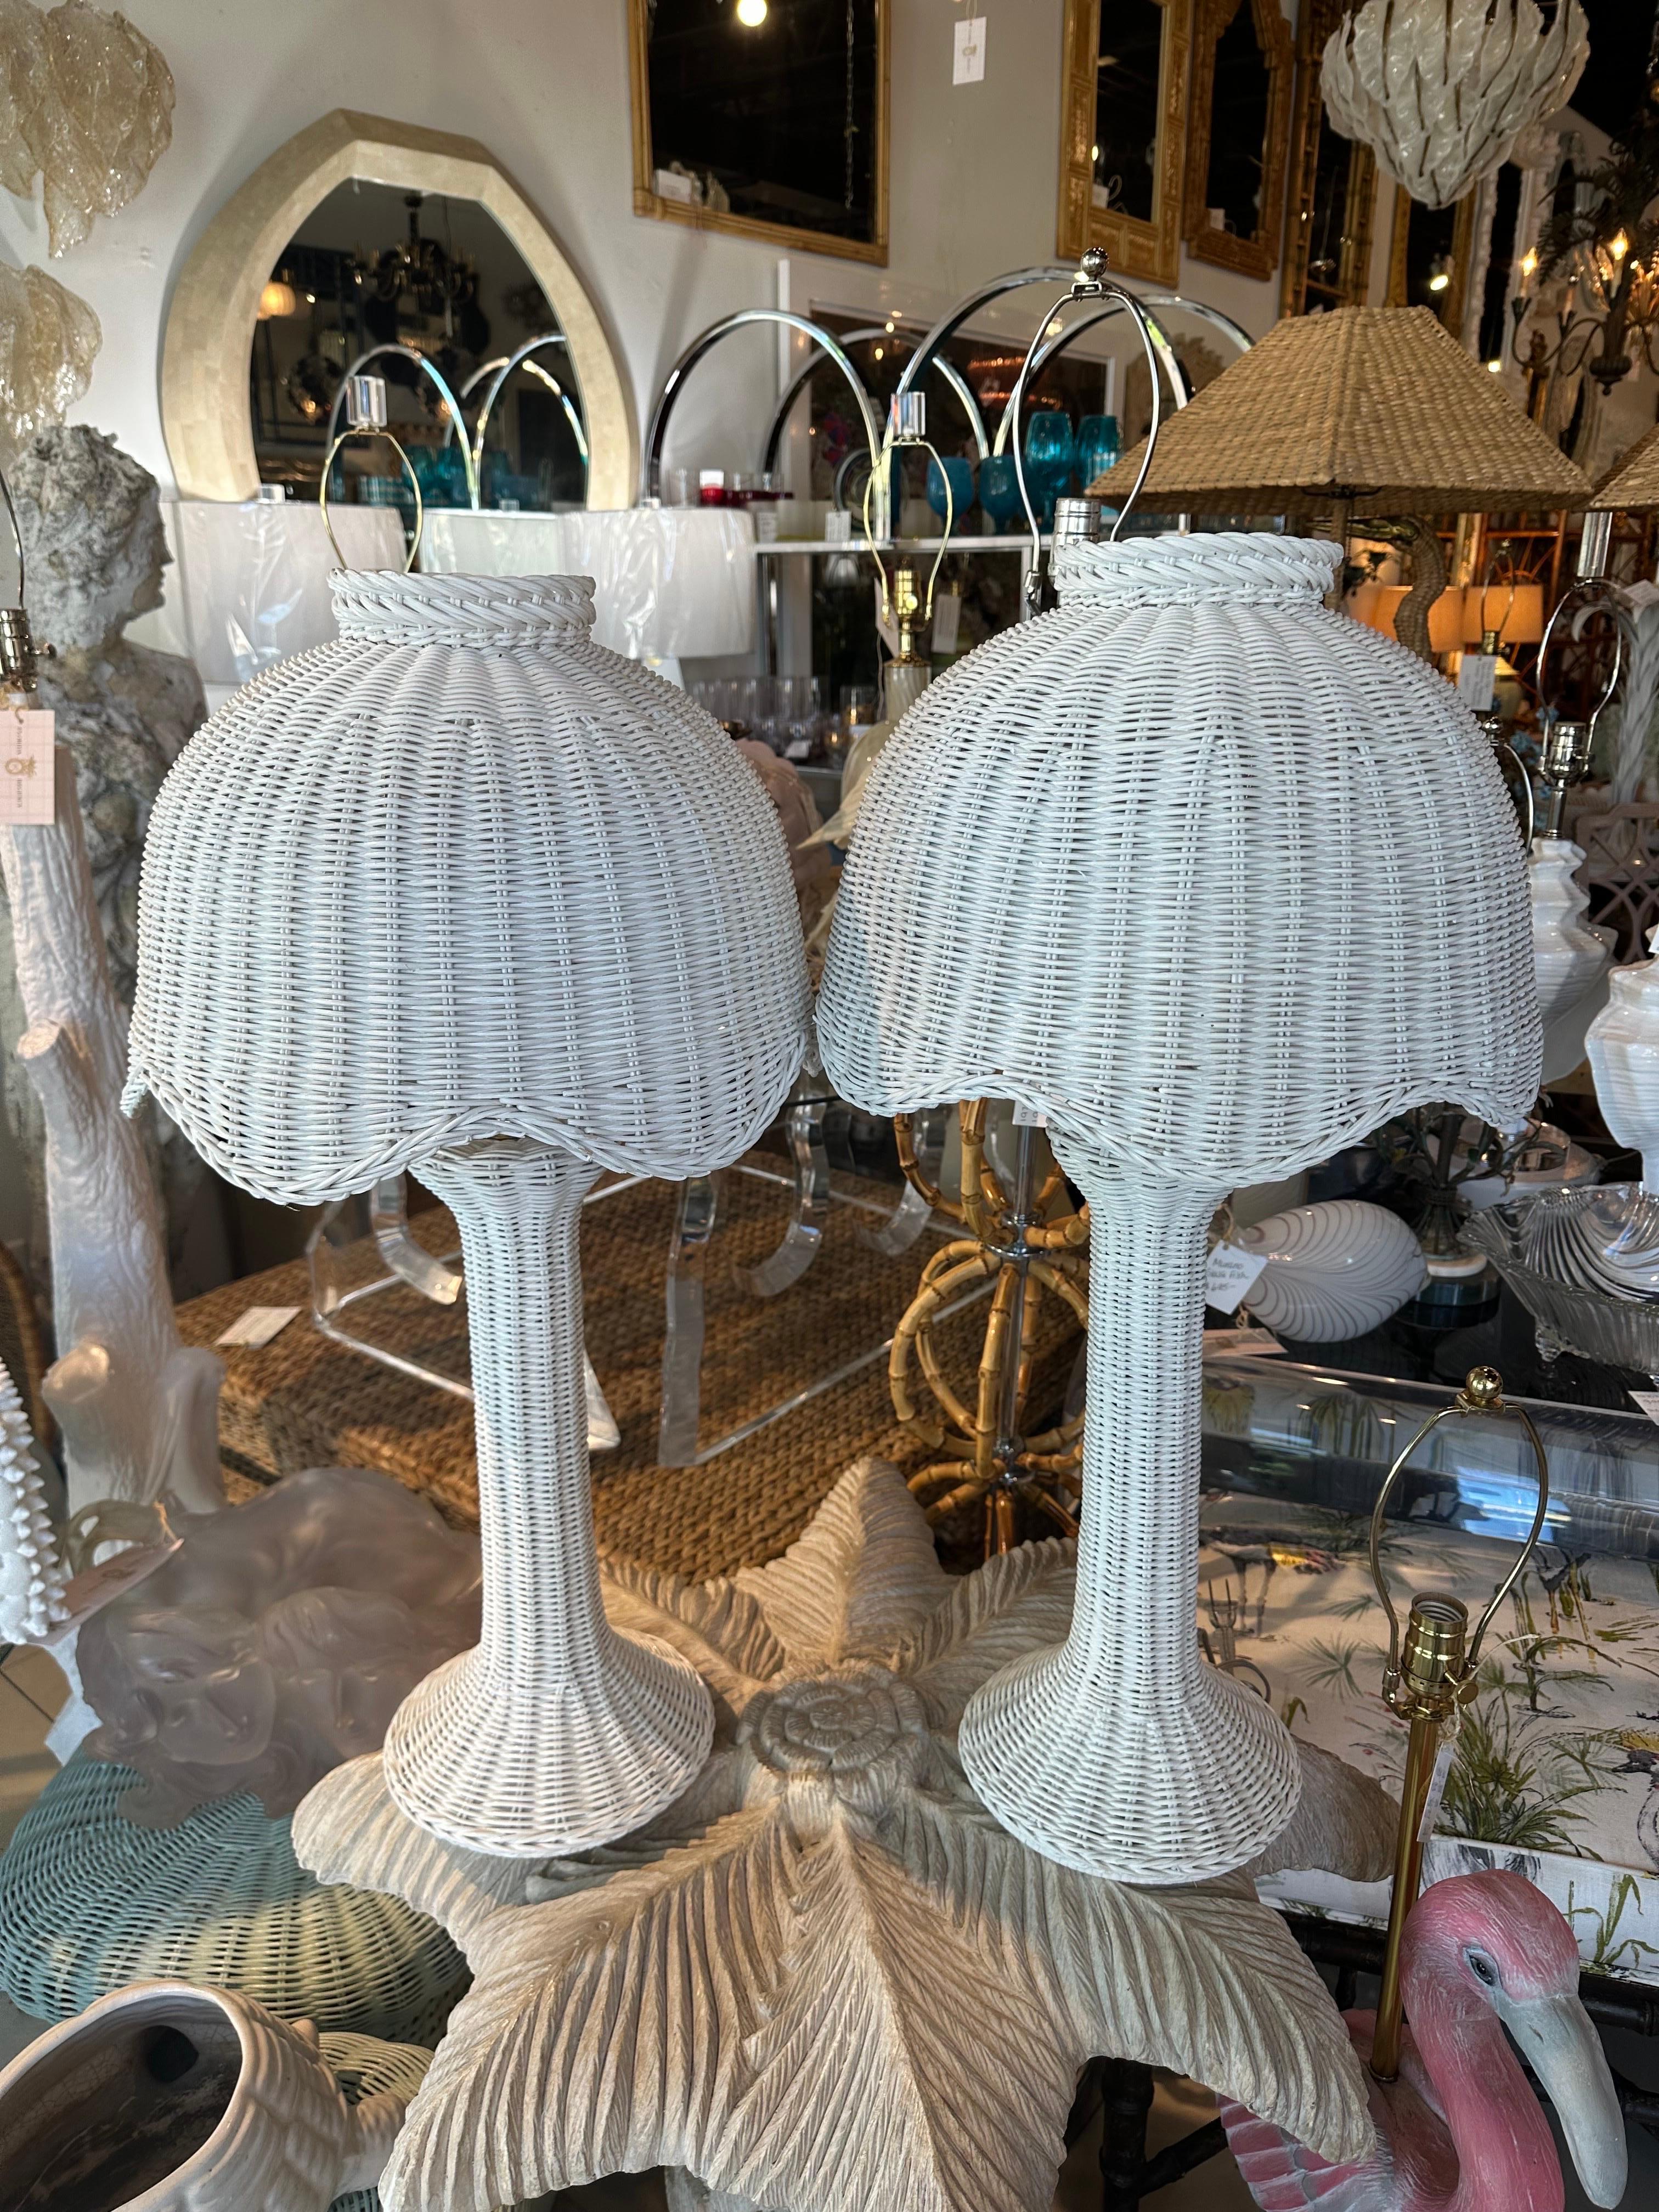 Vintage 1970s pair of white wicker table lamps with original scalloped matching lampshades. These have been newly wired with 3 way brass sockets & turn, clear cords. Original white wicker color with no seen damage or defects. Please inquire if you